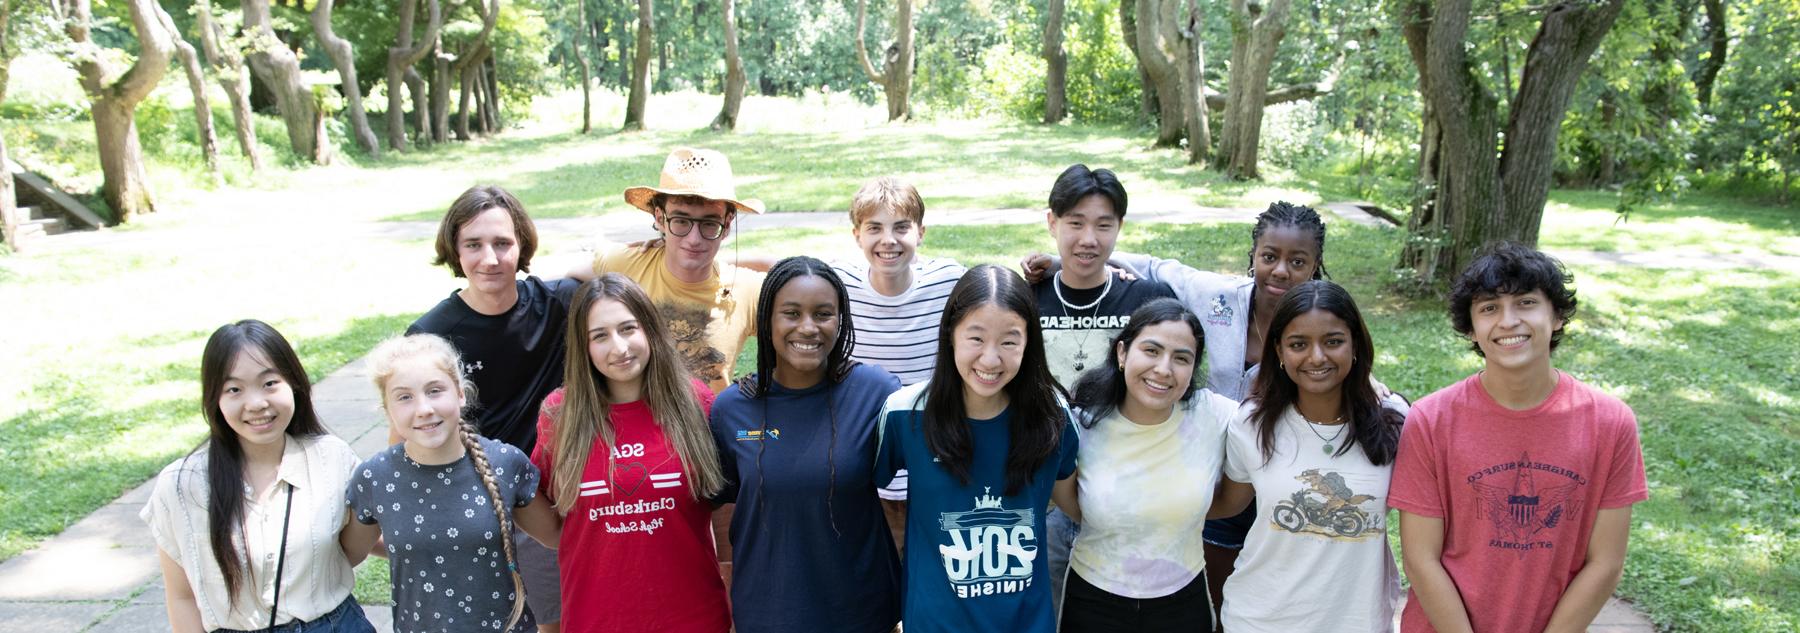 About the MCPS Student Climate Action Committee (SCAC)